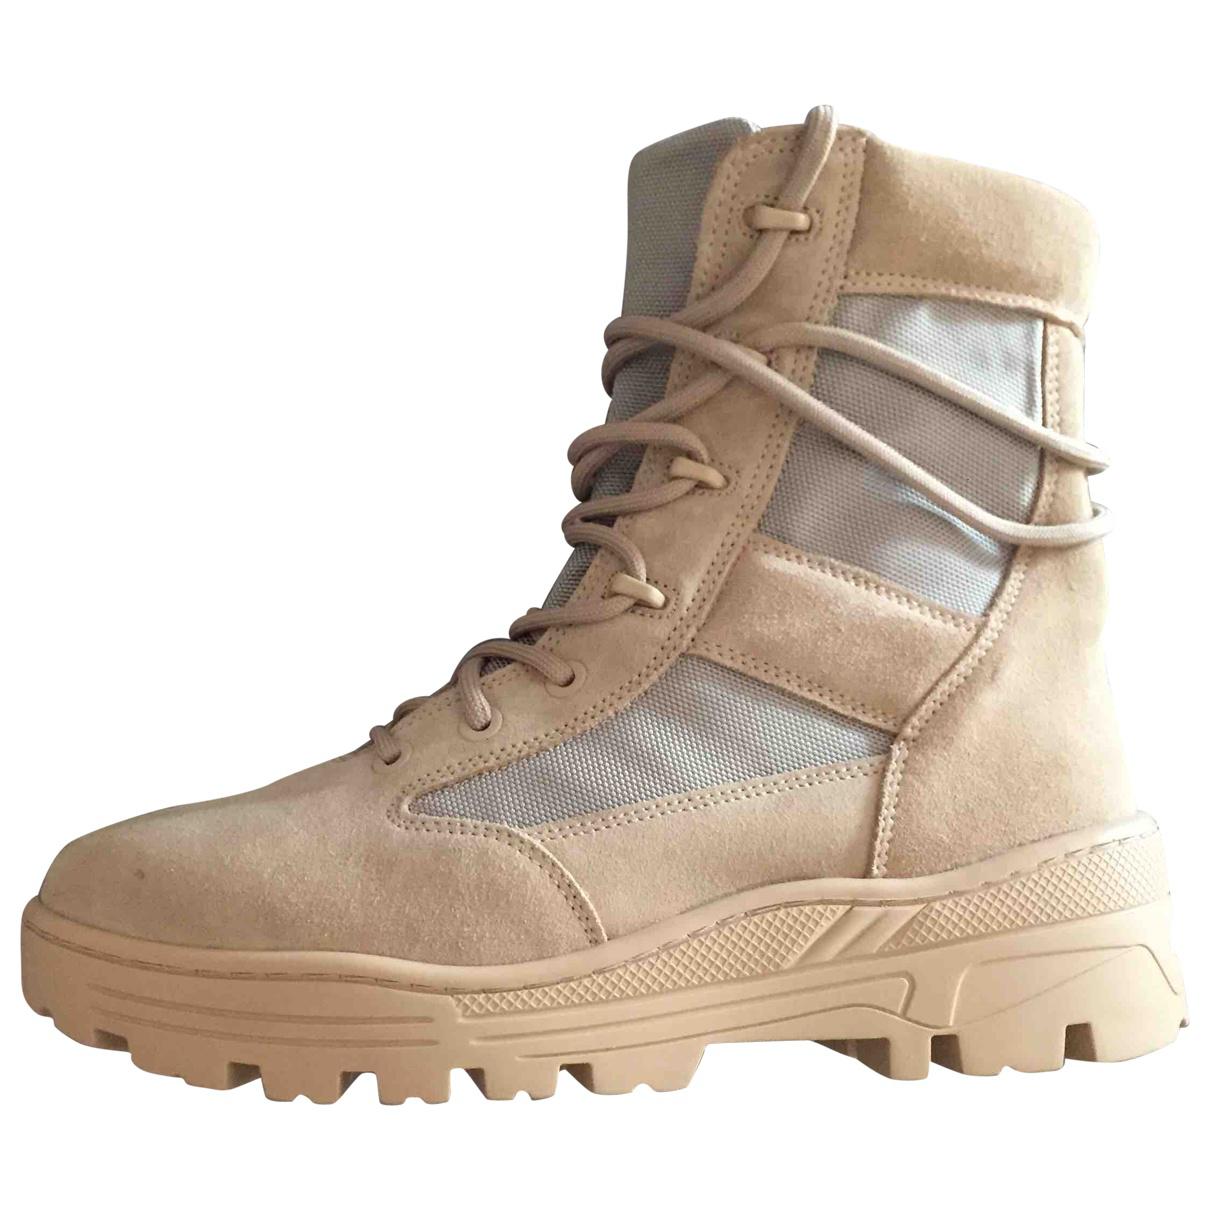 Yeezy Beige Suede Boots in Natural for 